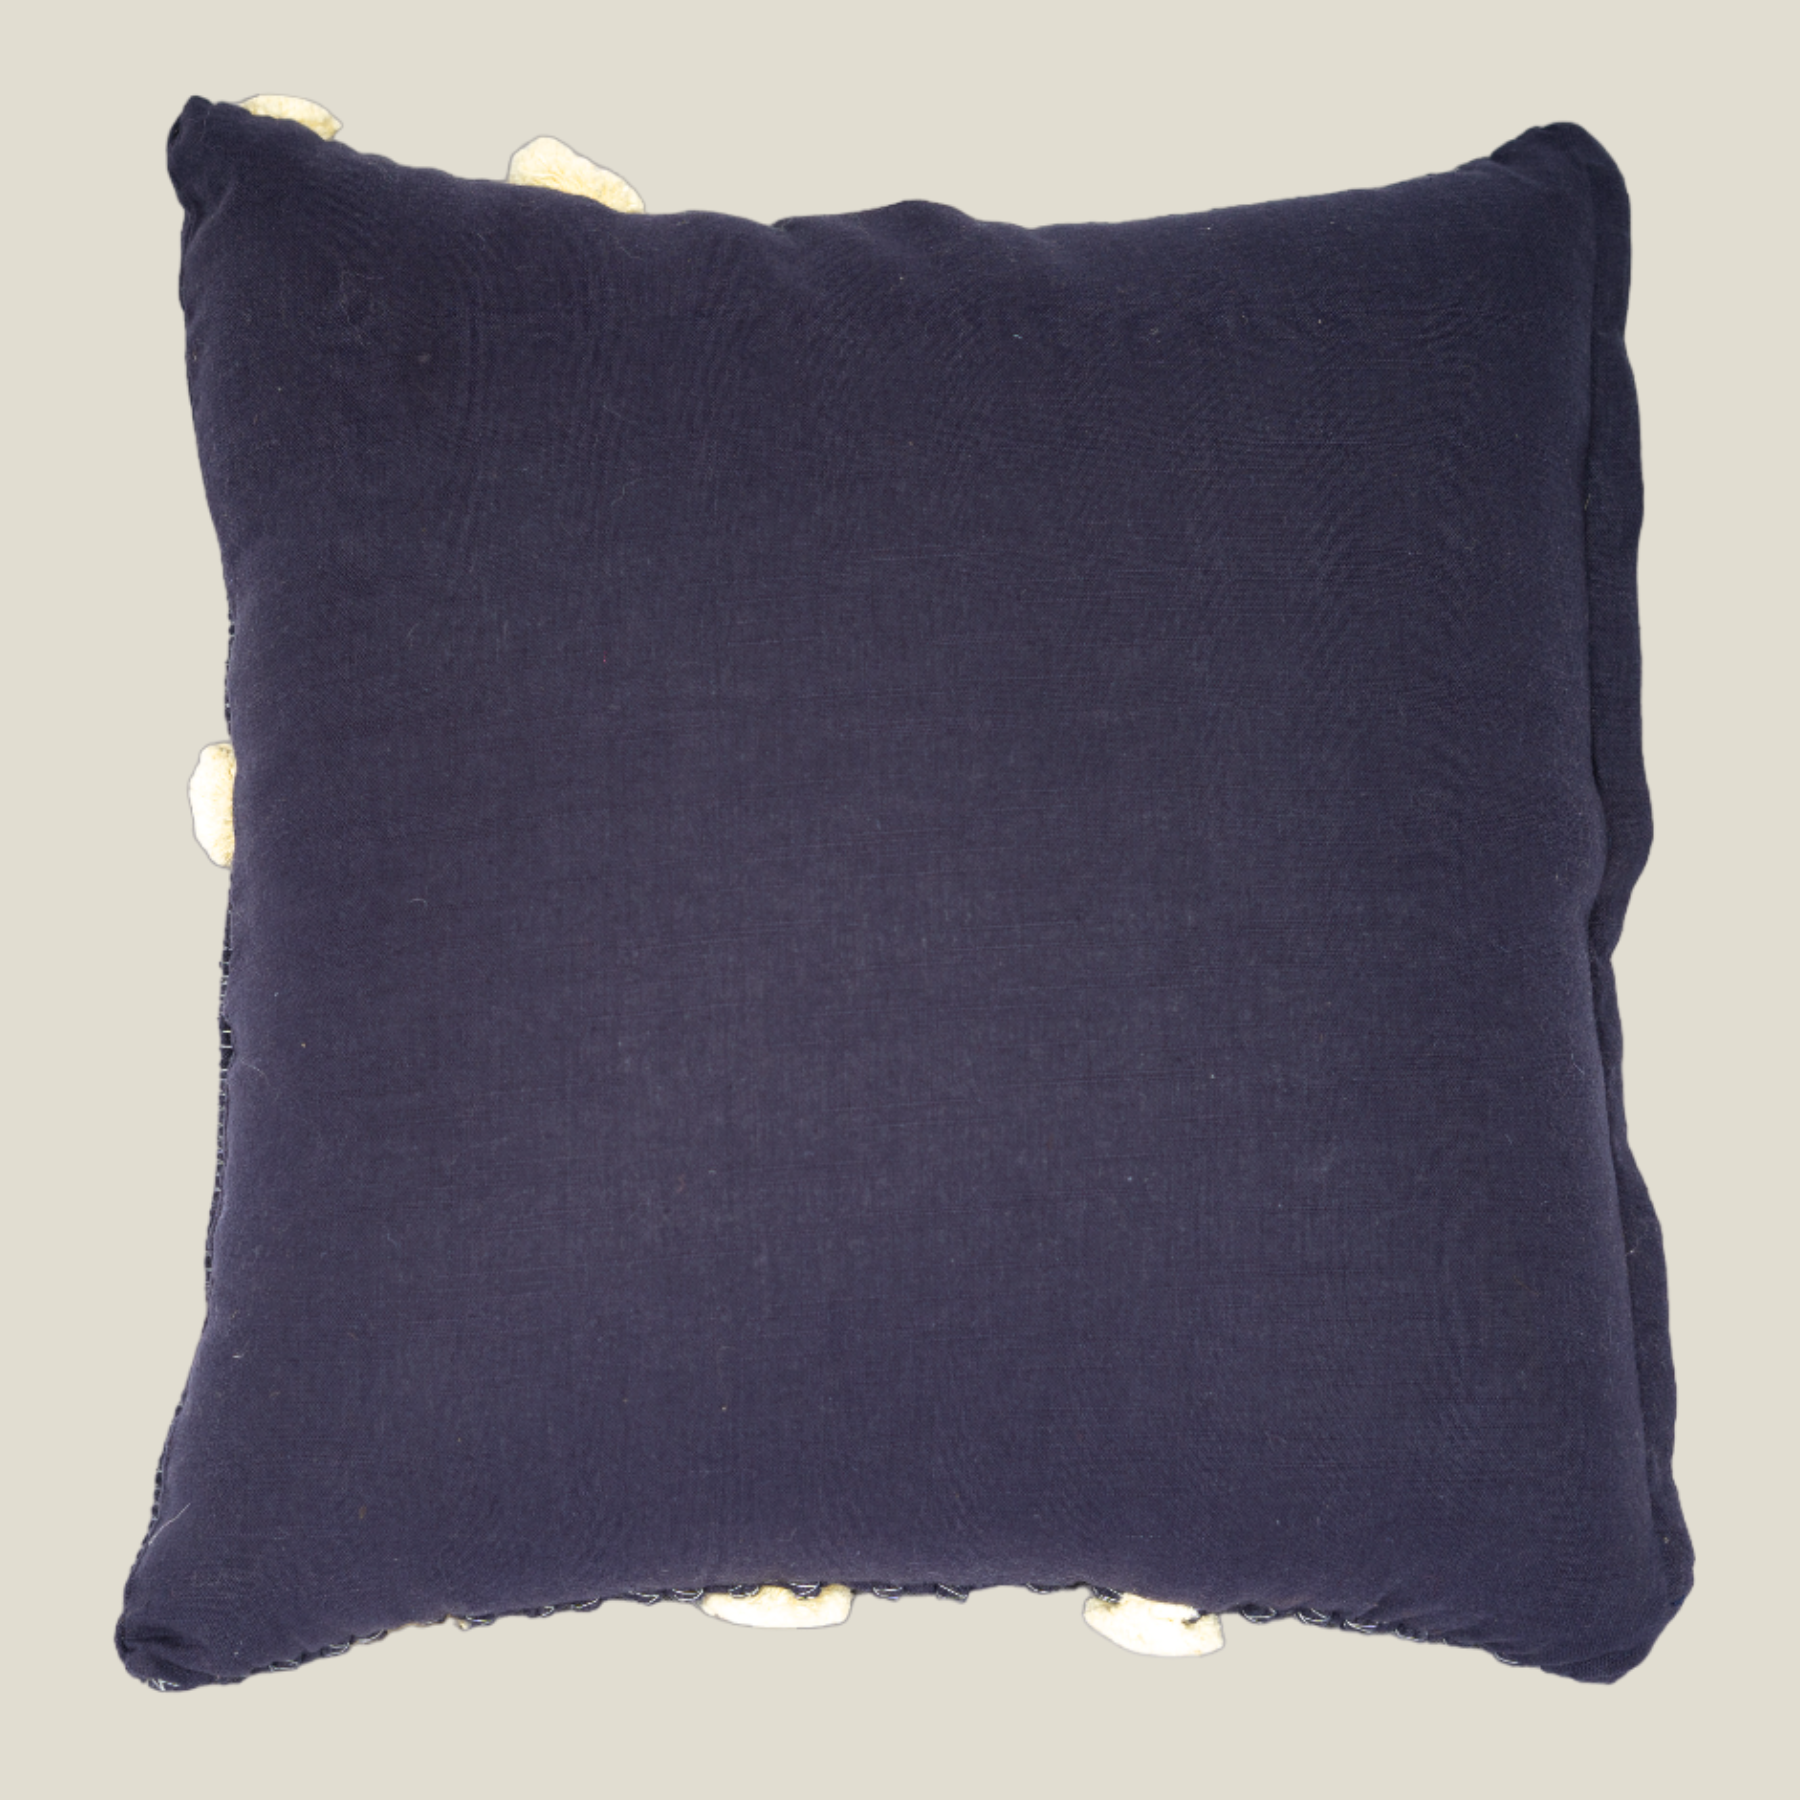 The LuxeLife Blue Cushion Covers with Pom Pom